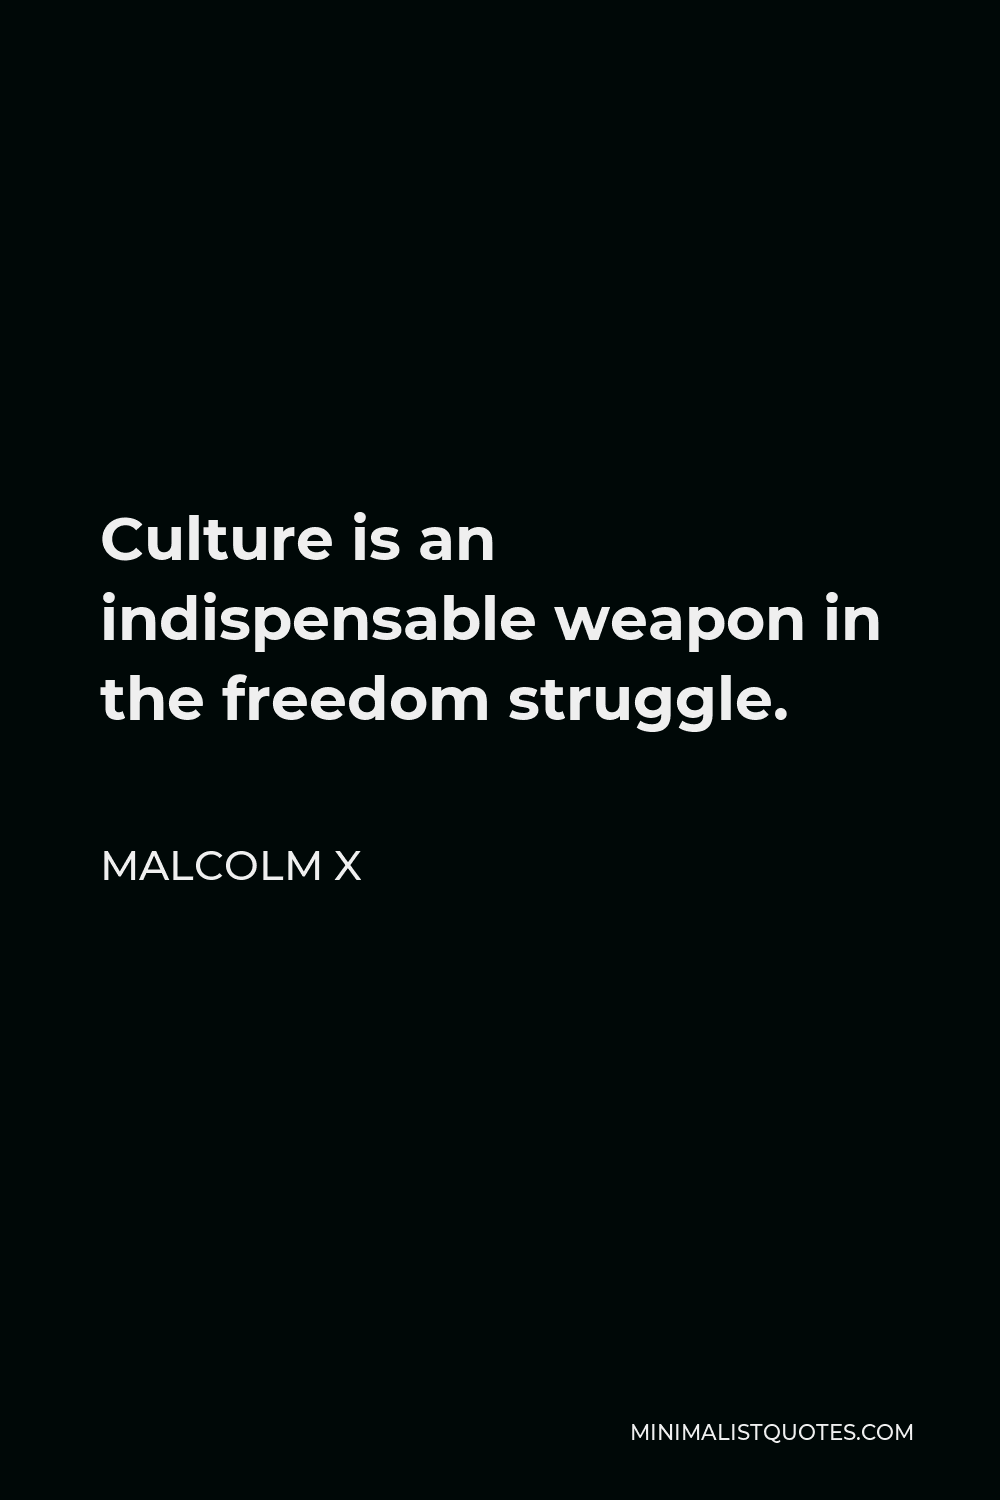 Malcolm X Quote - Culture is an indispensable weapon in the freedom struggle.